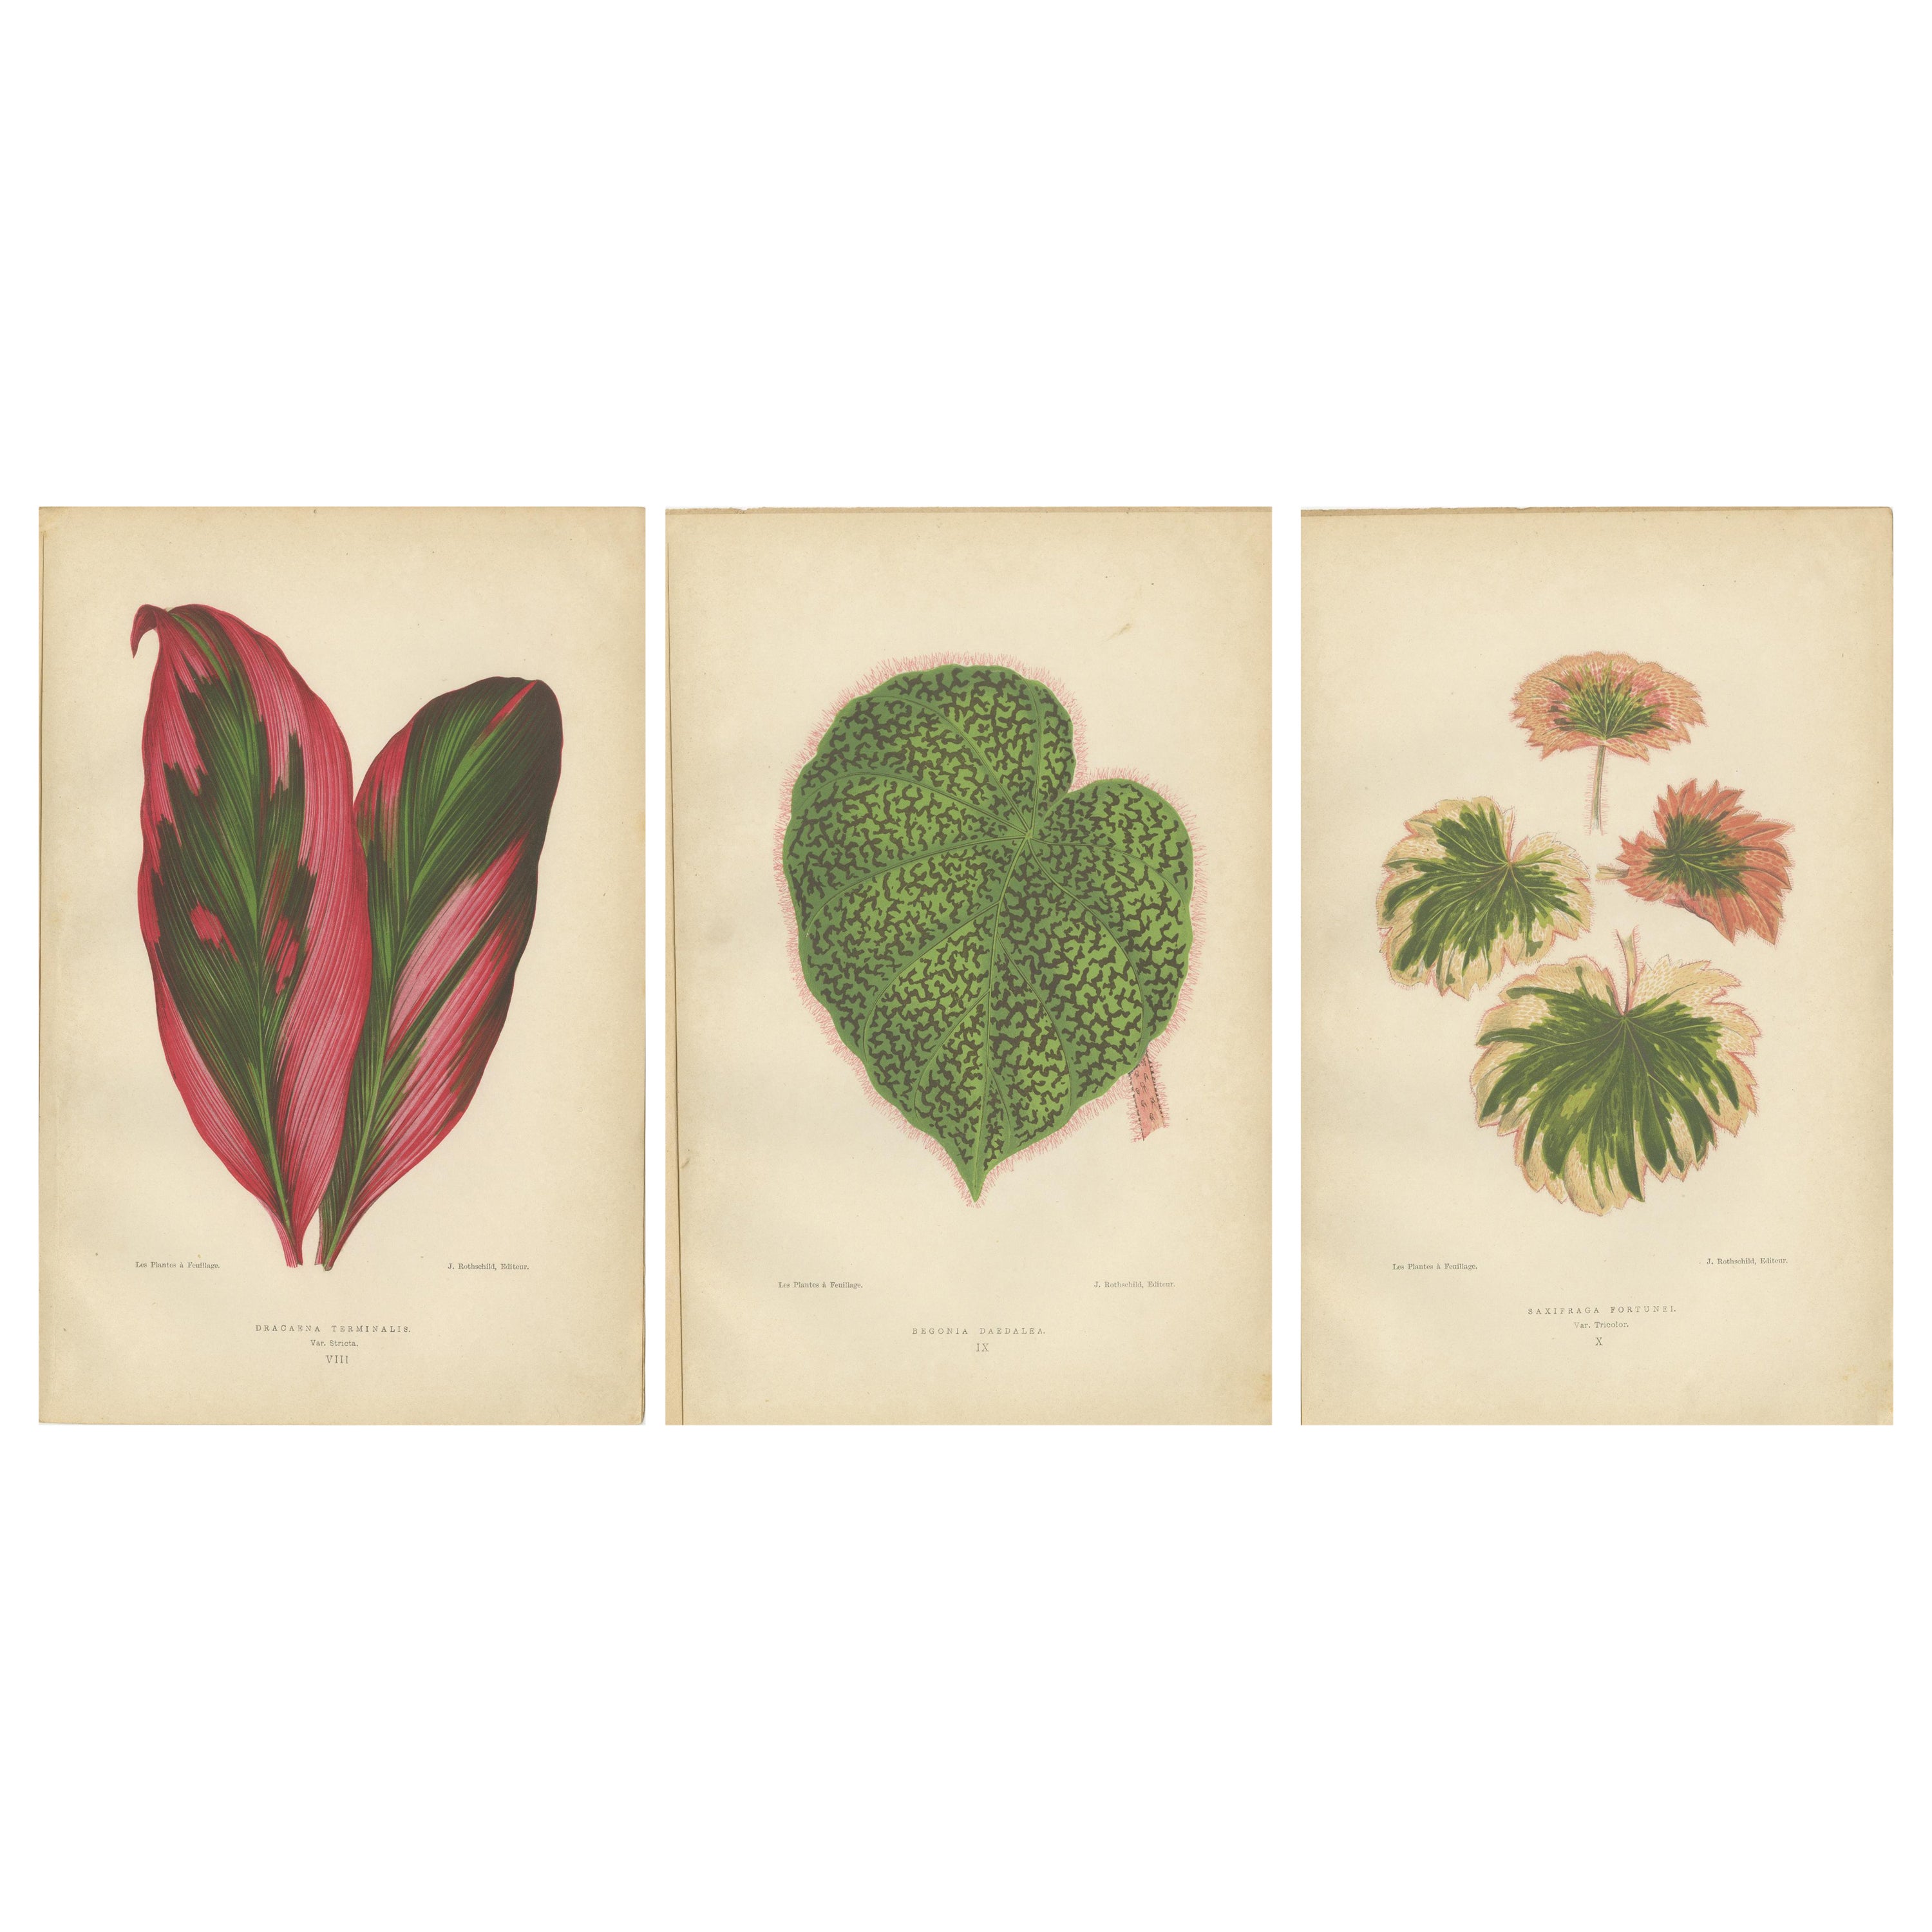 Vintage Botanical Elegance: A Triptych of 19th Century Colored Foliage Studies